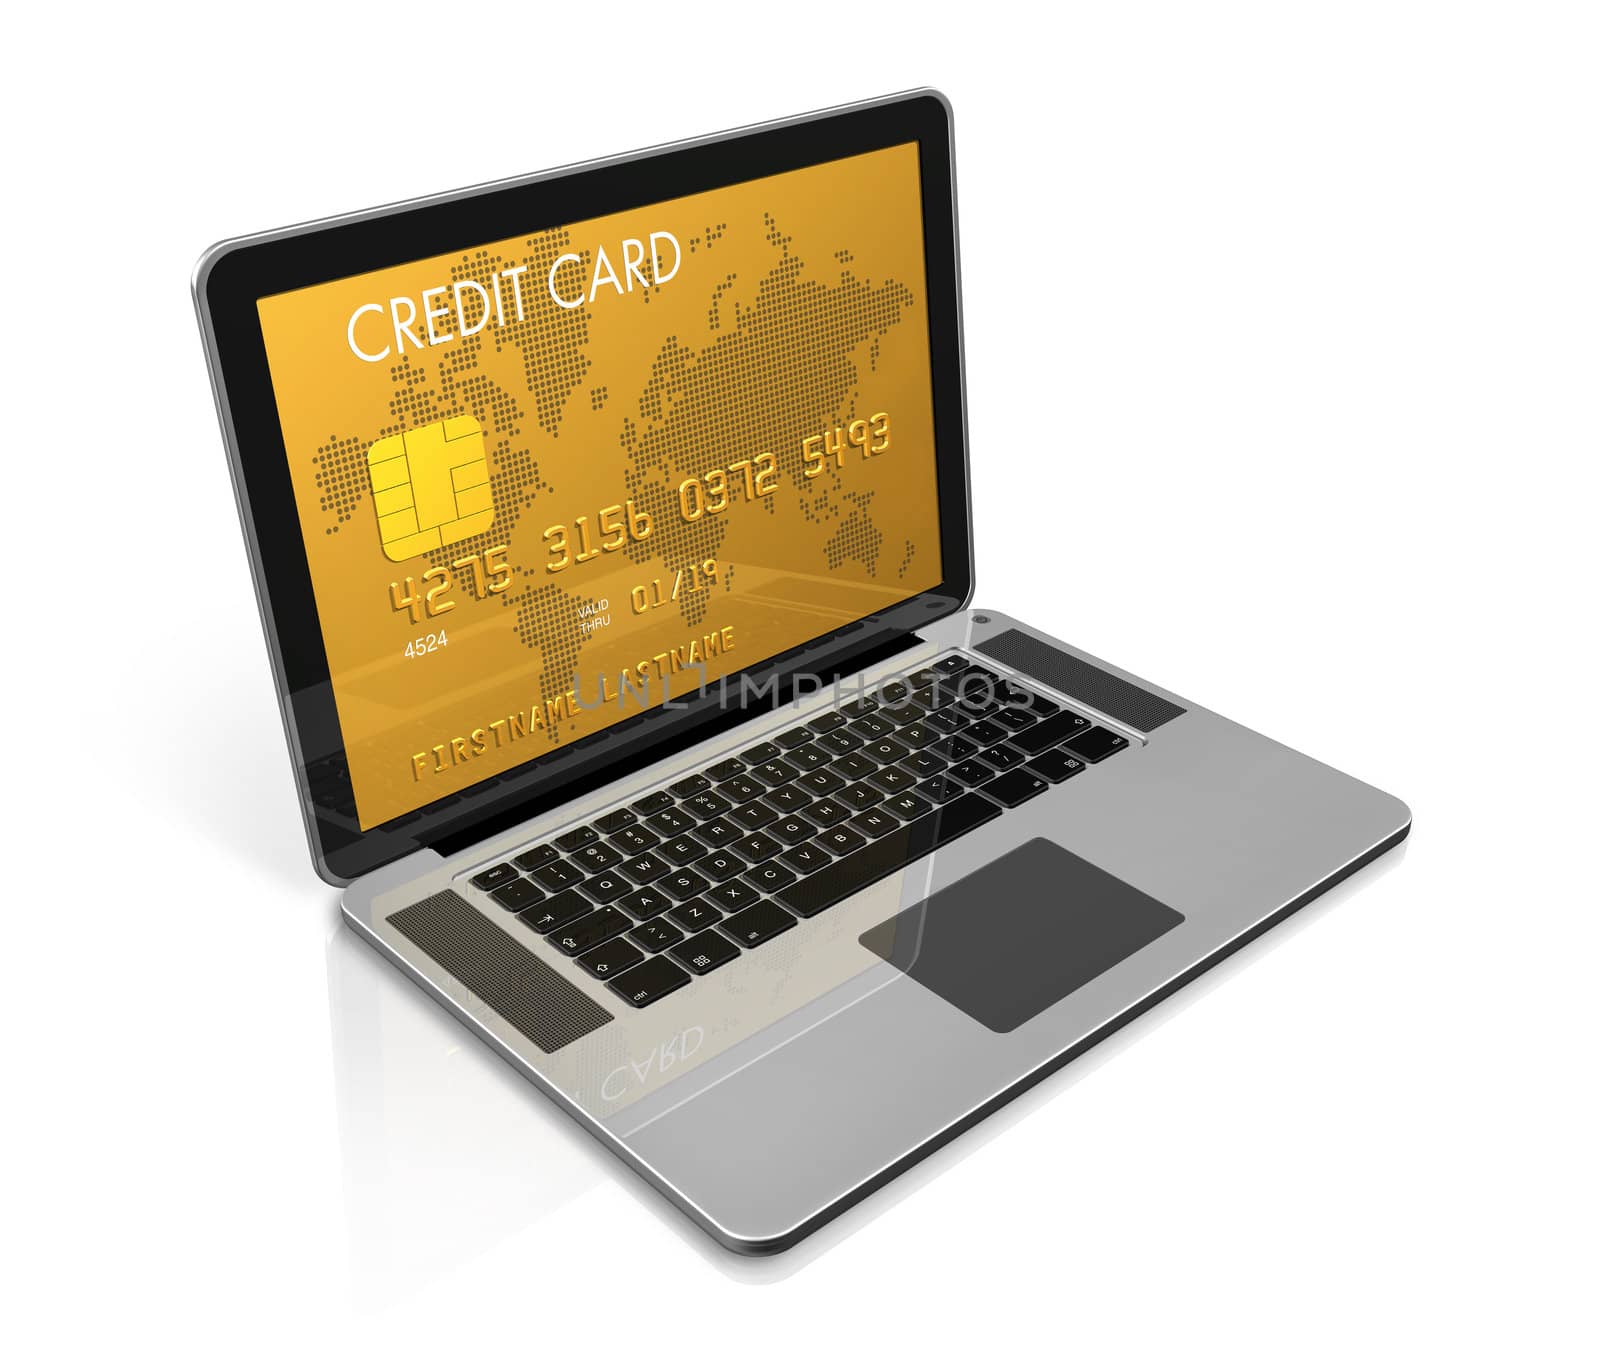 gold credit card on a laptop screen by daboost